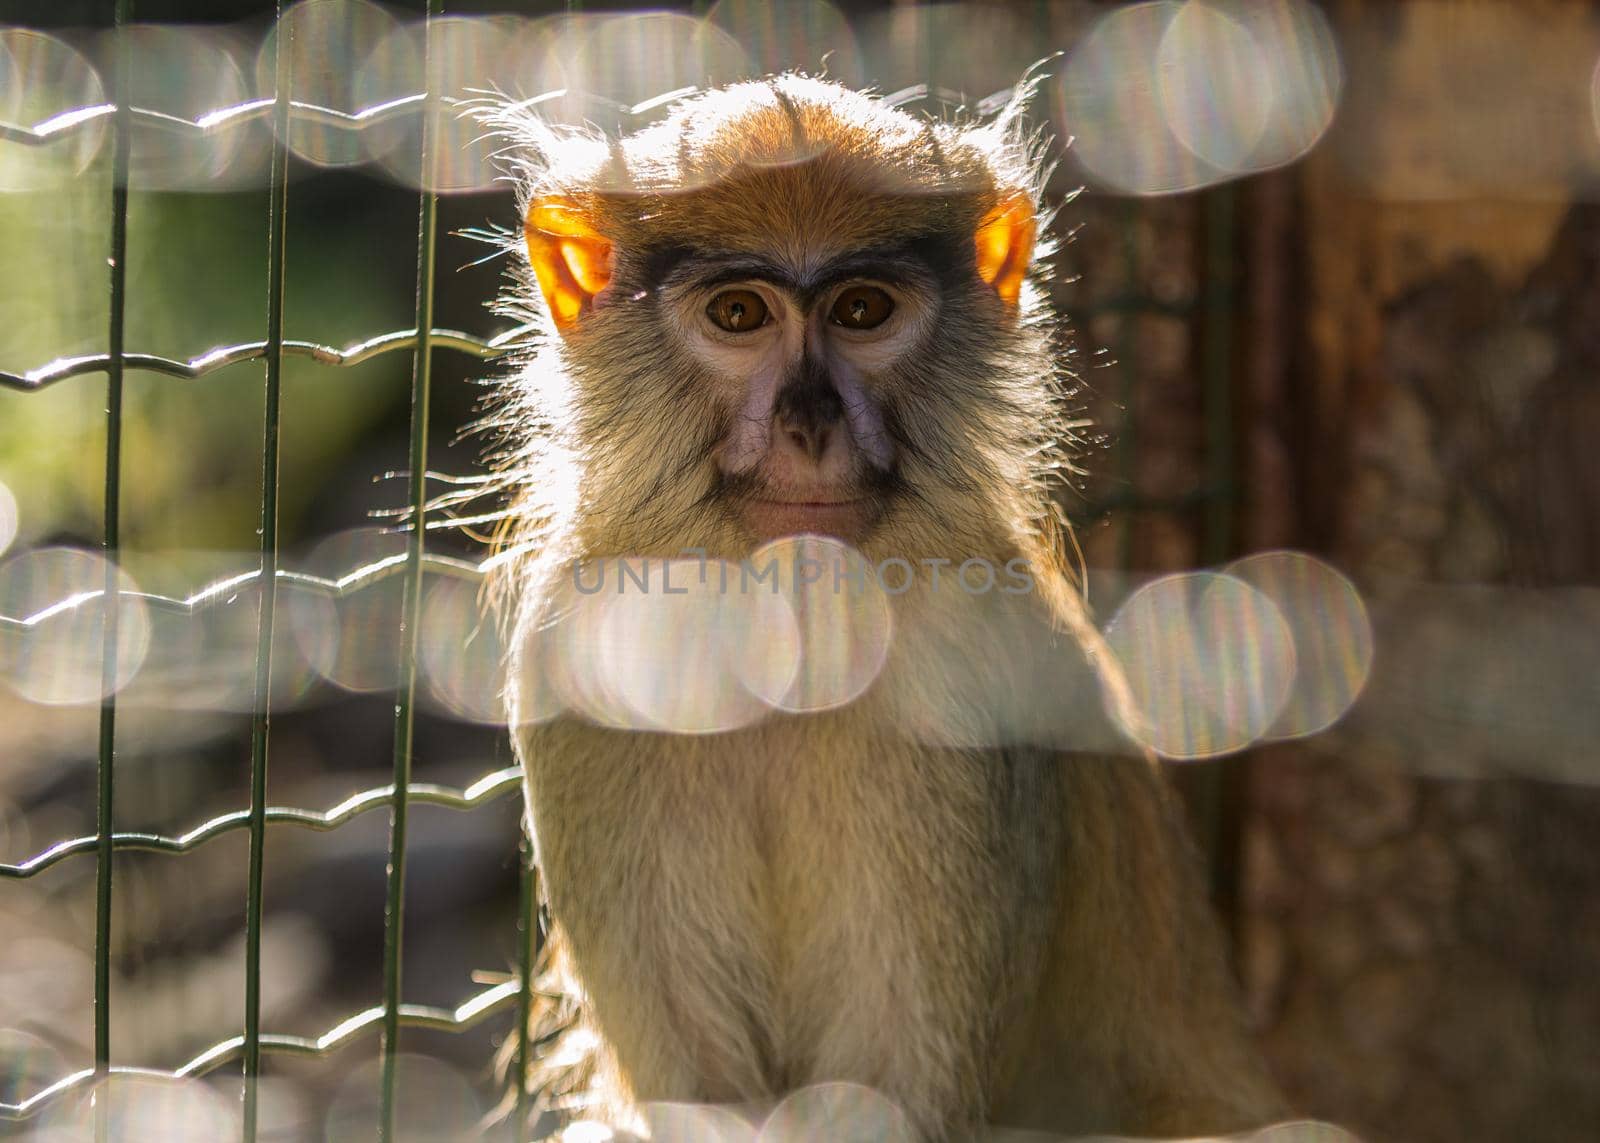 Brown fluffy zoo monkey posing for portrait picture, sitting in cage